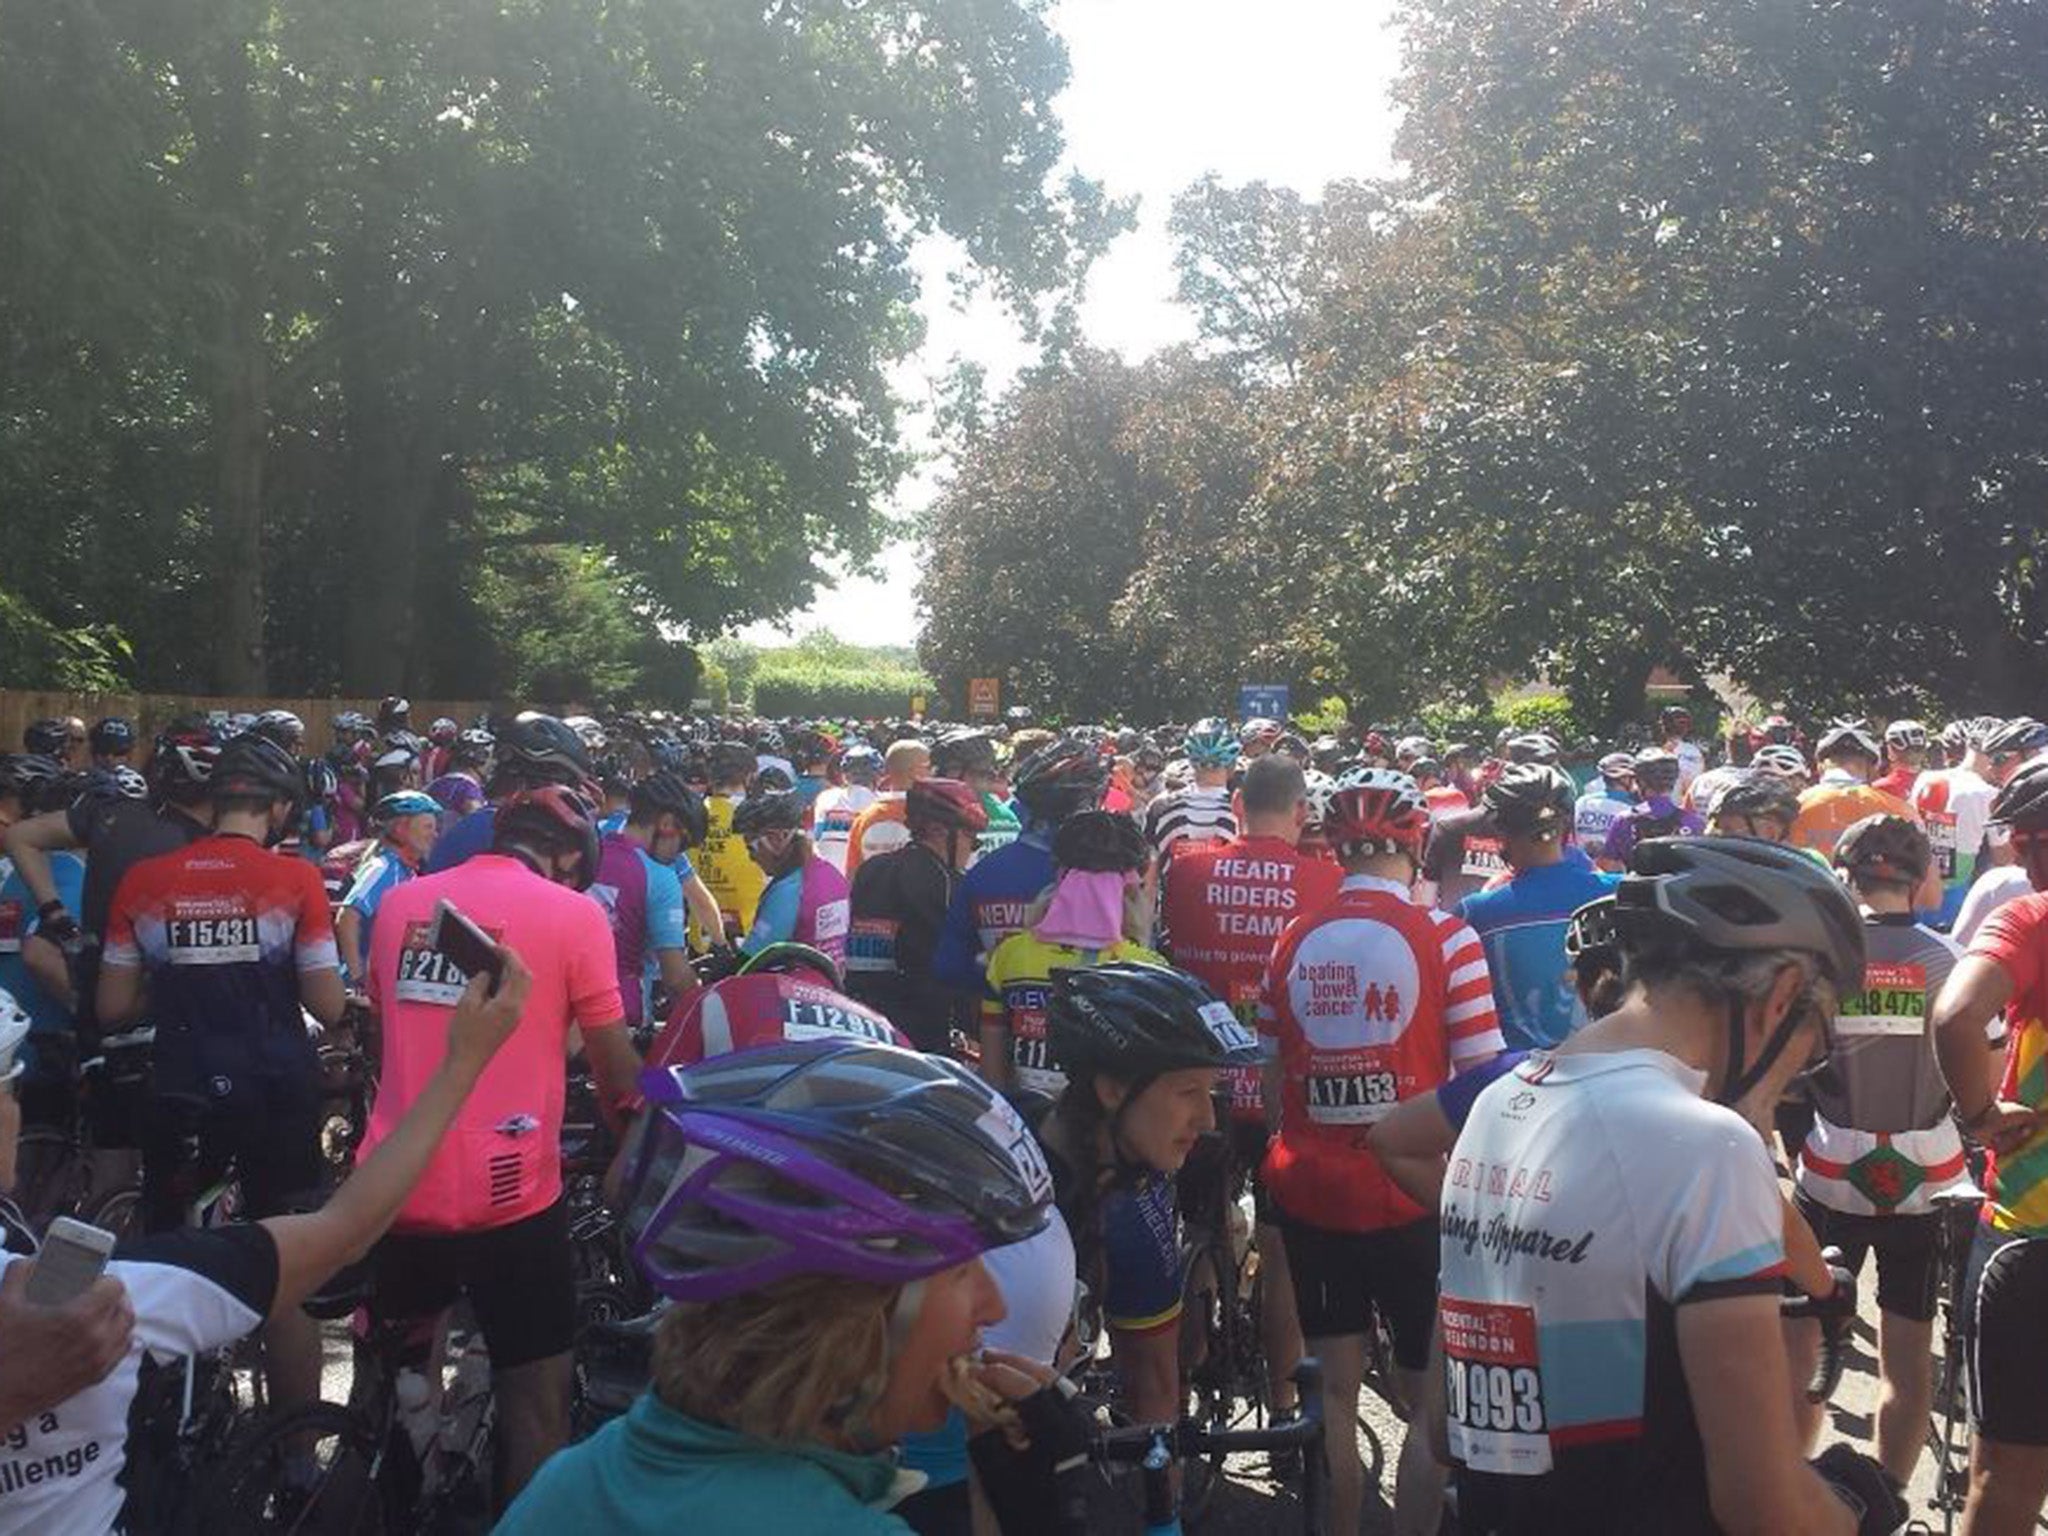 Cyclists queued for up to an hour after the crash between Pyrford and Ripley